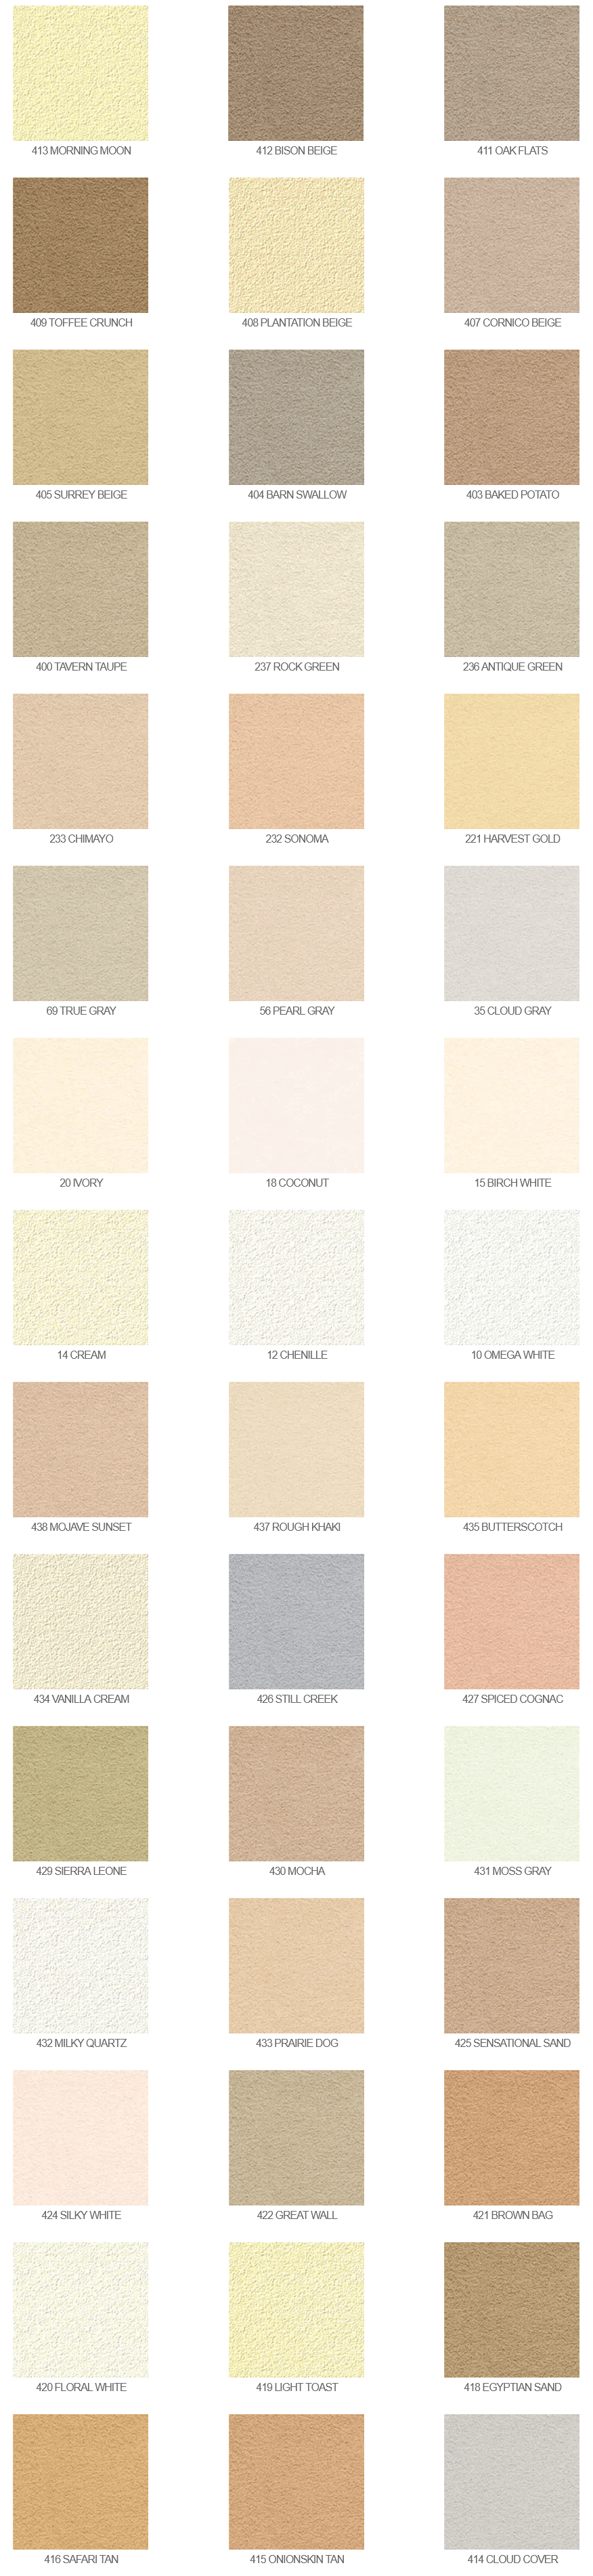 Photo with colour swatches of Hard Coat Stucco Options